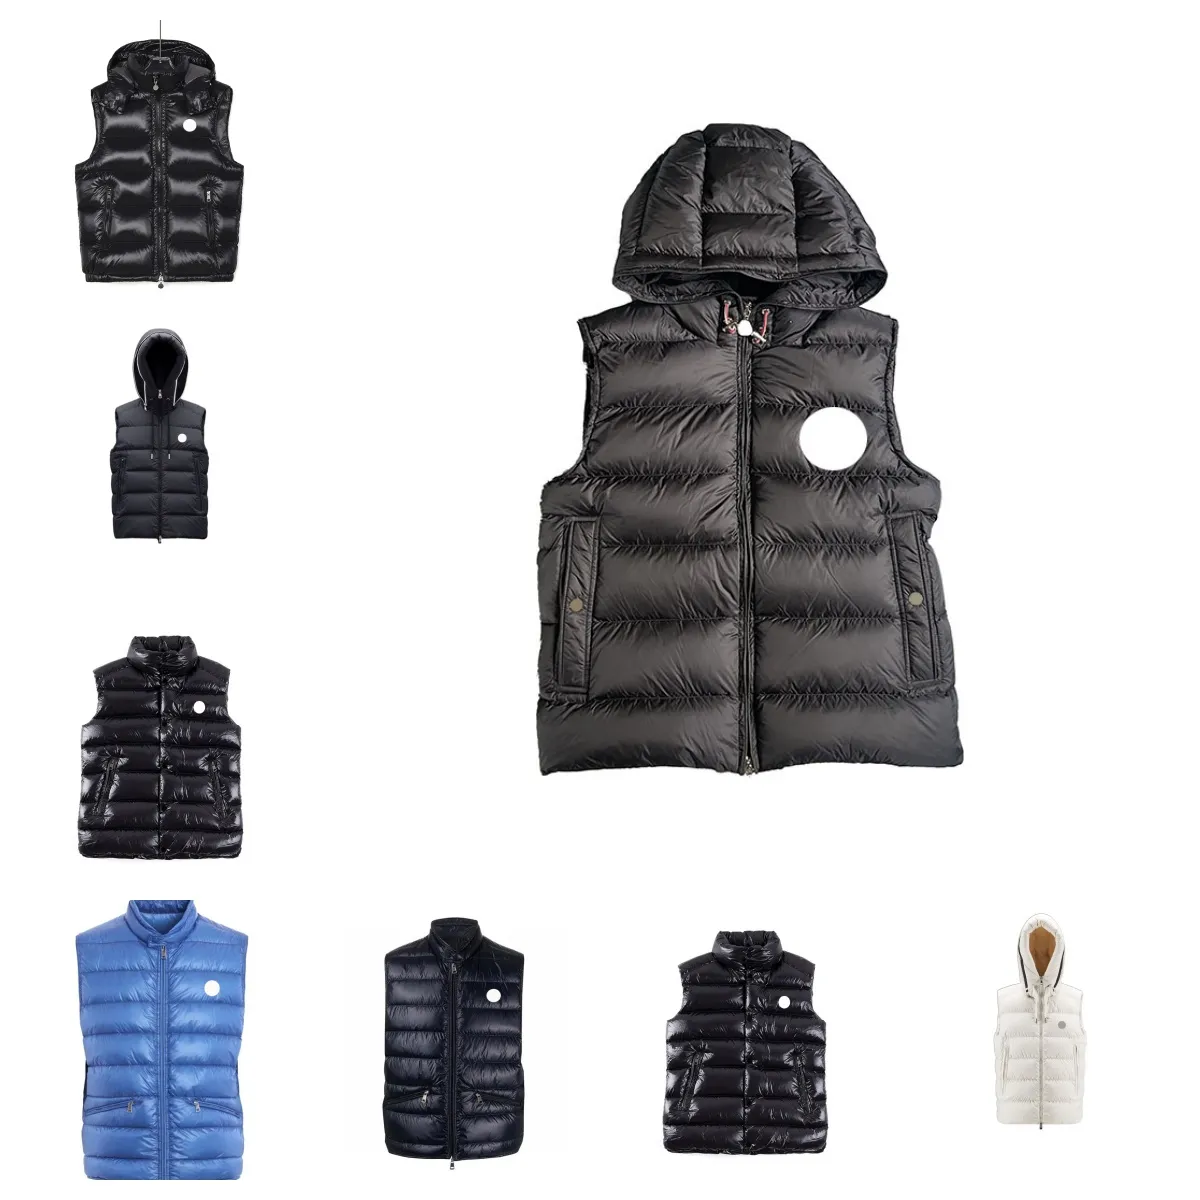 NEW Winter men and women fashion warm solid down vest sleeveless jacket Classic Feather Jackets Casual bodywarmer Vests Coat Manteau L6